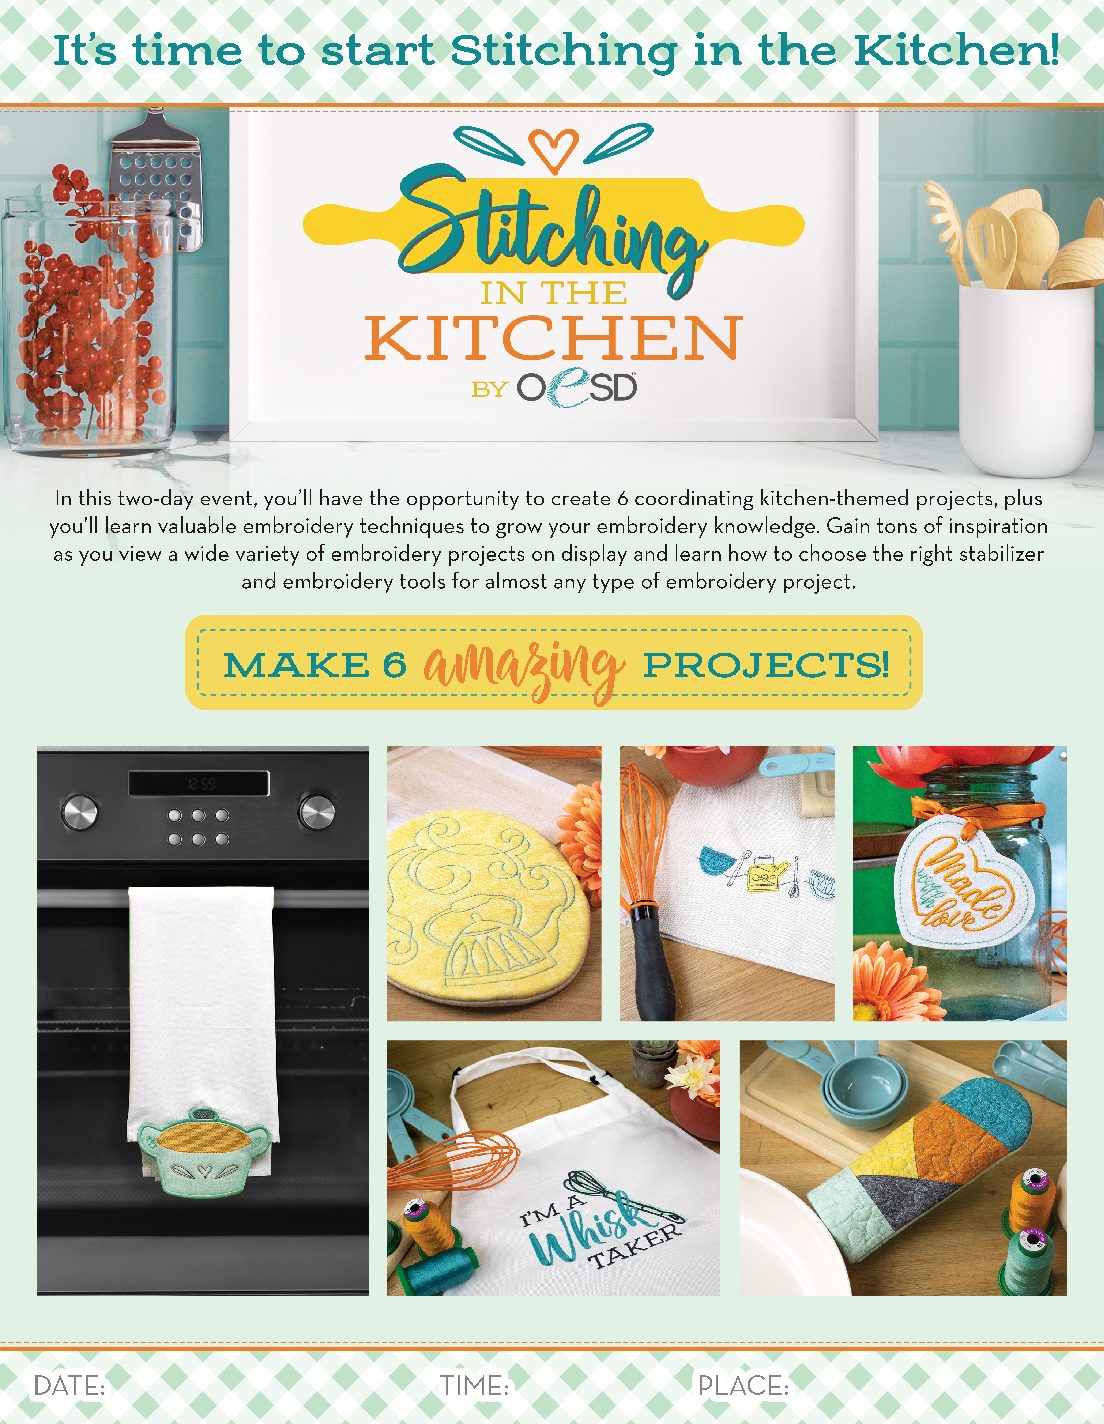 OESD Stitching in the Kitchen – 06/10/22 Event Center